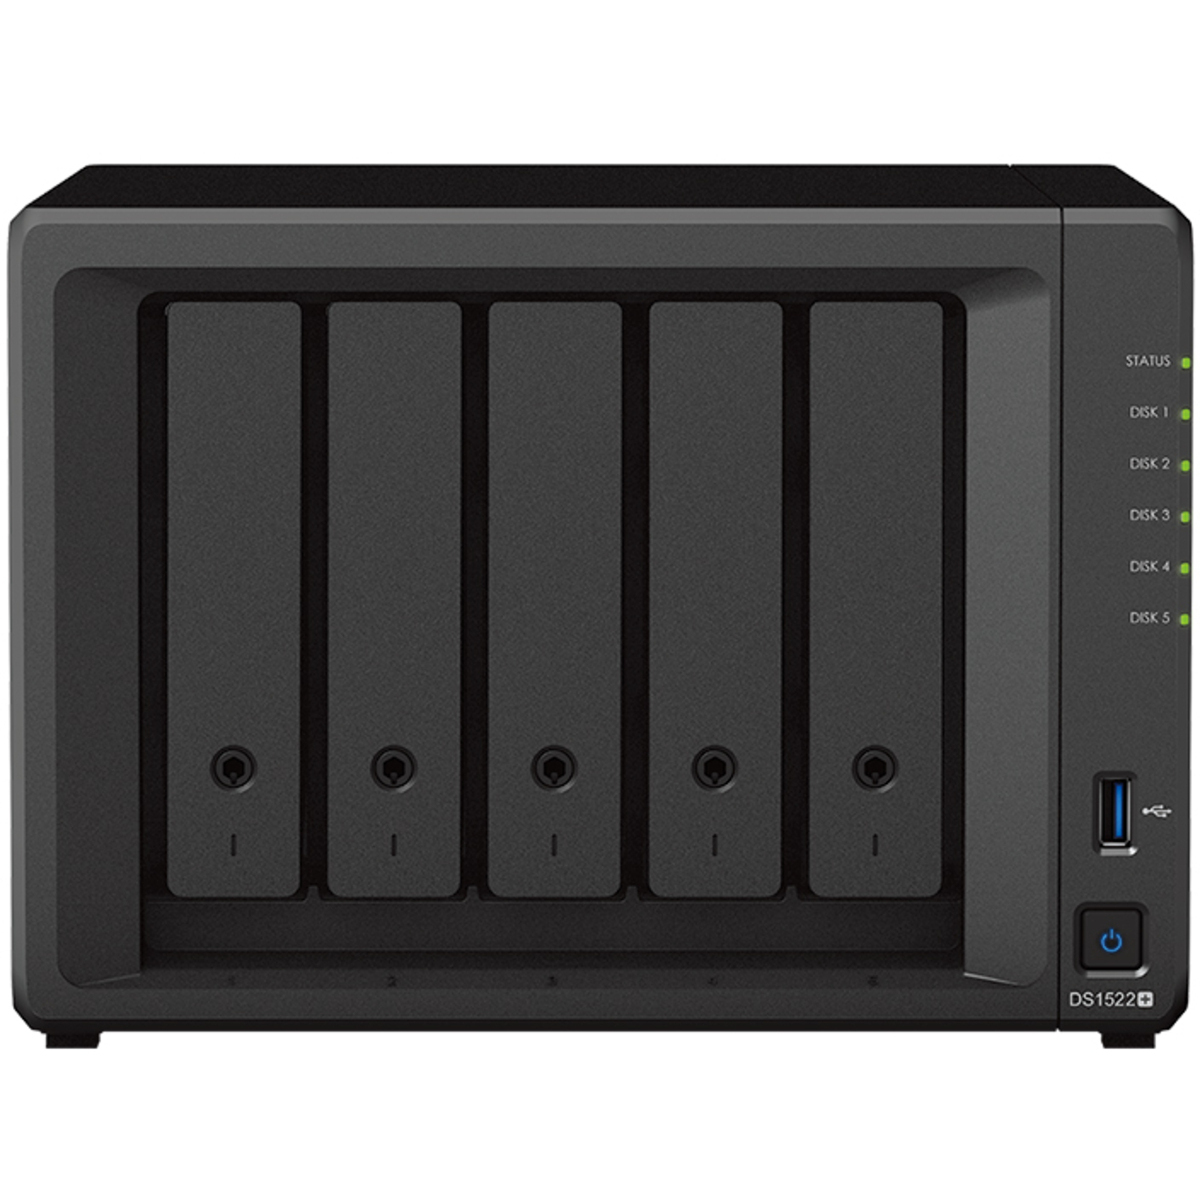 Synology DiskStation DS1522+ 20tb 5-Bay Desktop Multimedia / Power User / Business NAS - Network Attached Storage Device 5x4tb Samsung 870 EVO MZ-77E4T0BAM 2.5 560/530MB/s SATA 6Gb/s SSD CONSUMER Class Drives Installed - Burn-In Tested - ON SALE DiskStation DS1522+